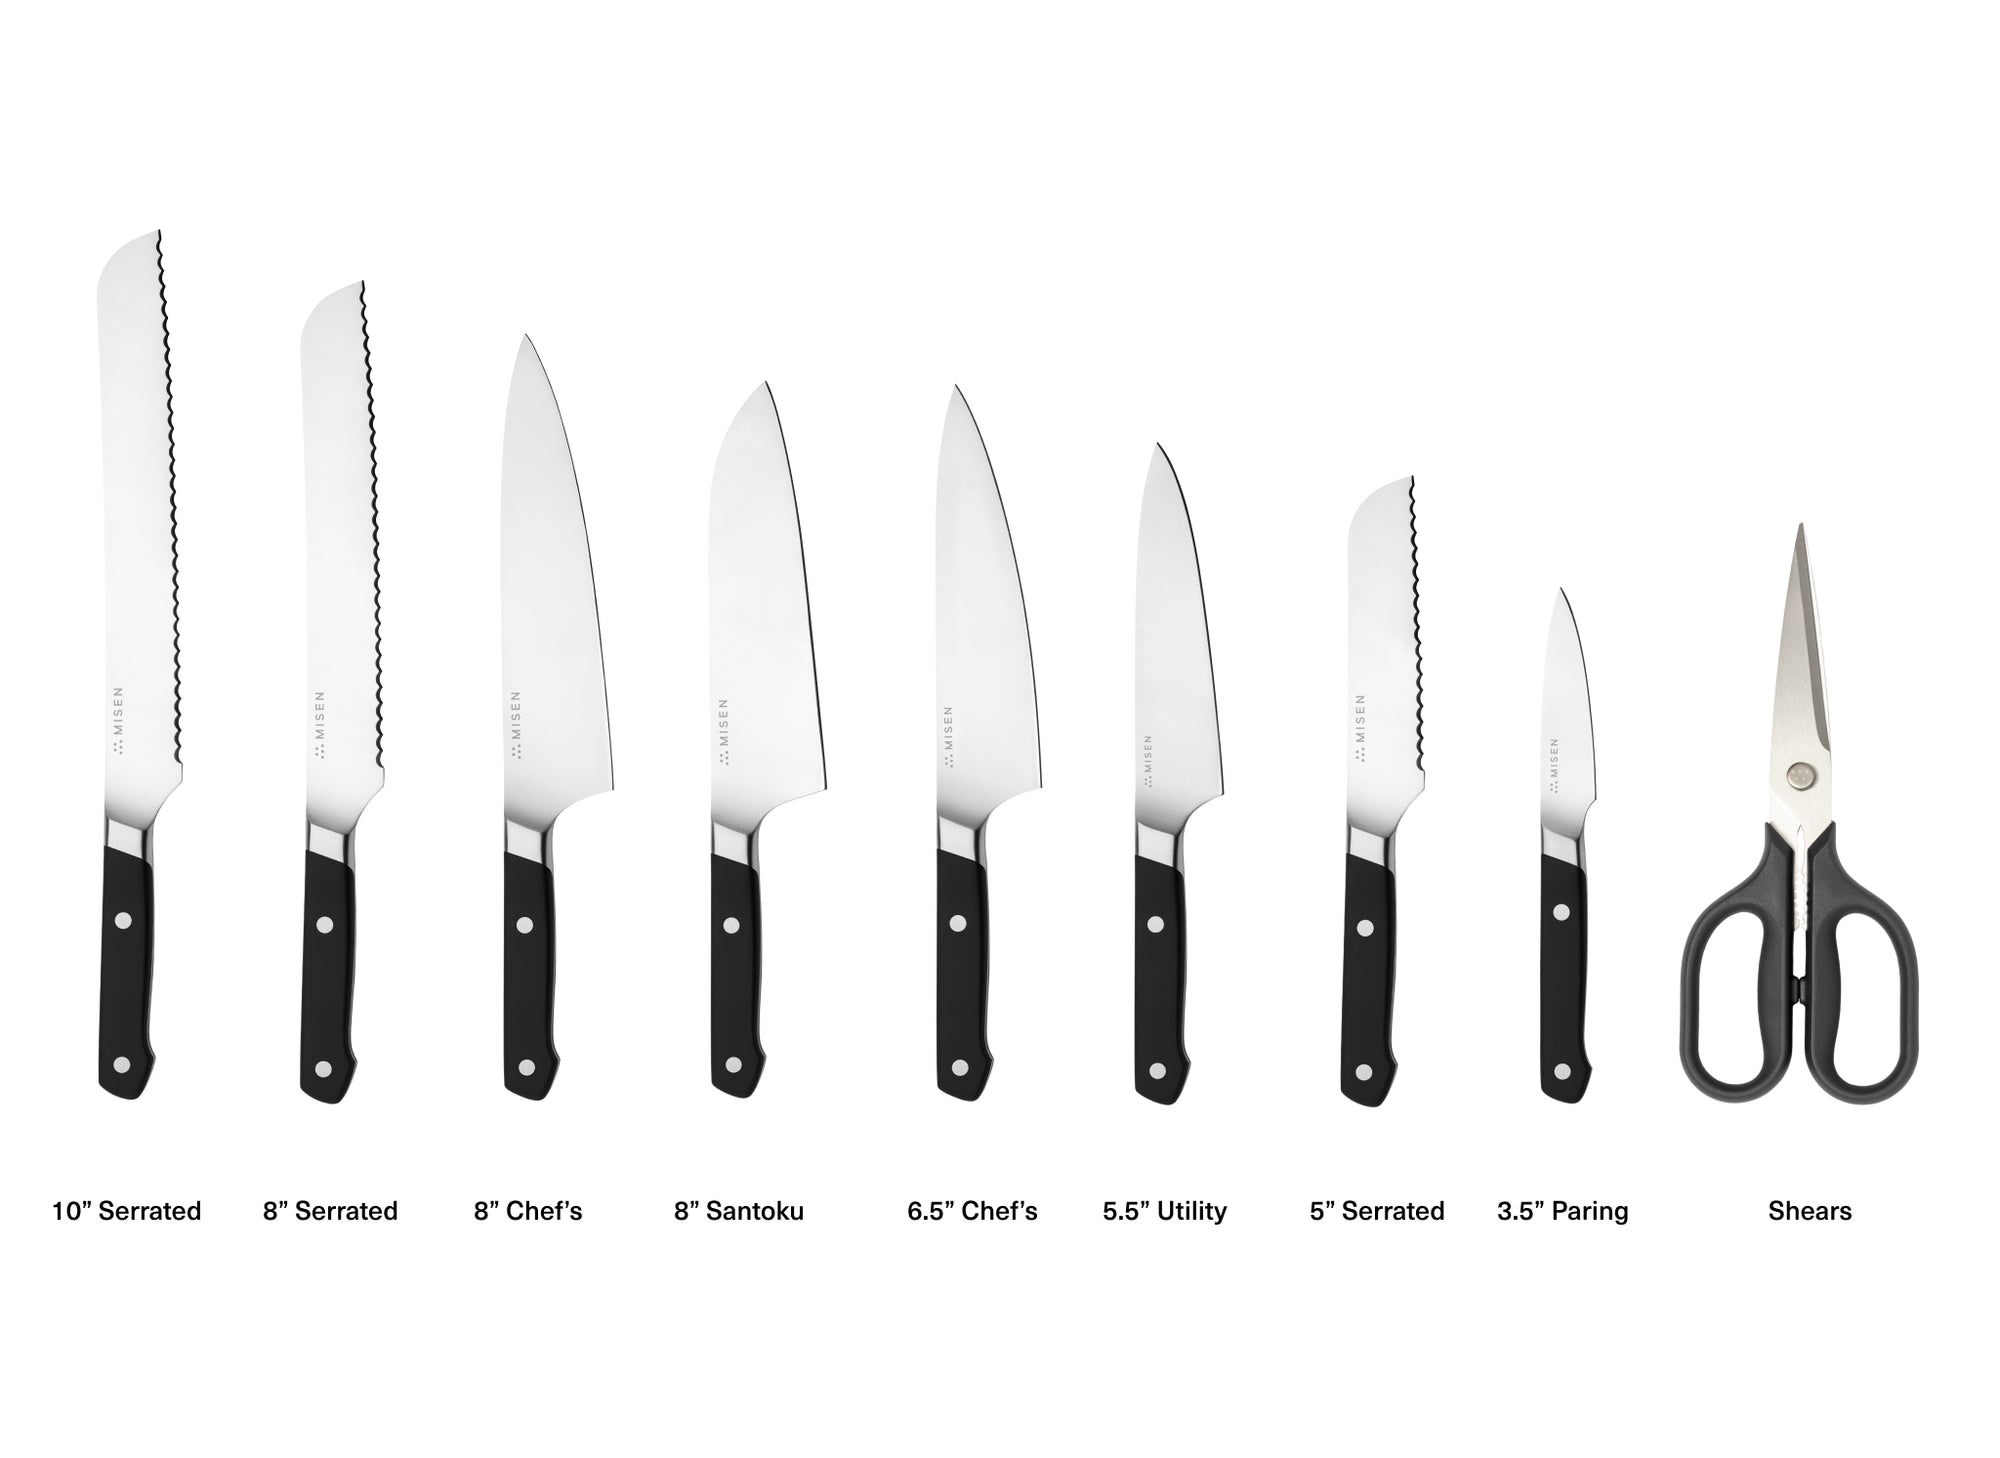 Misen sharpens all kinds of knives, including shears